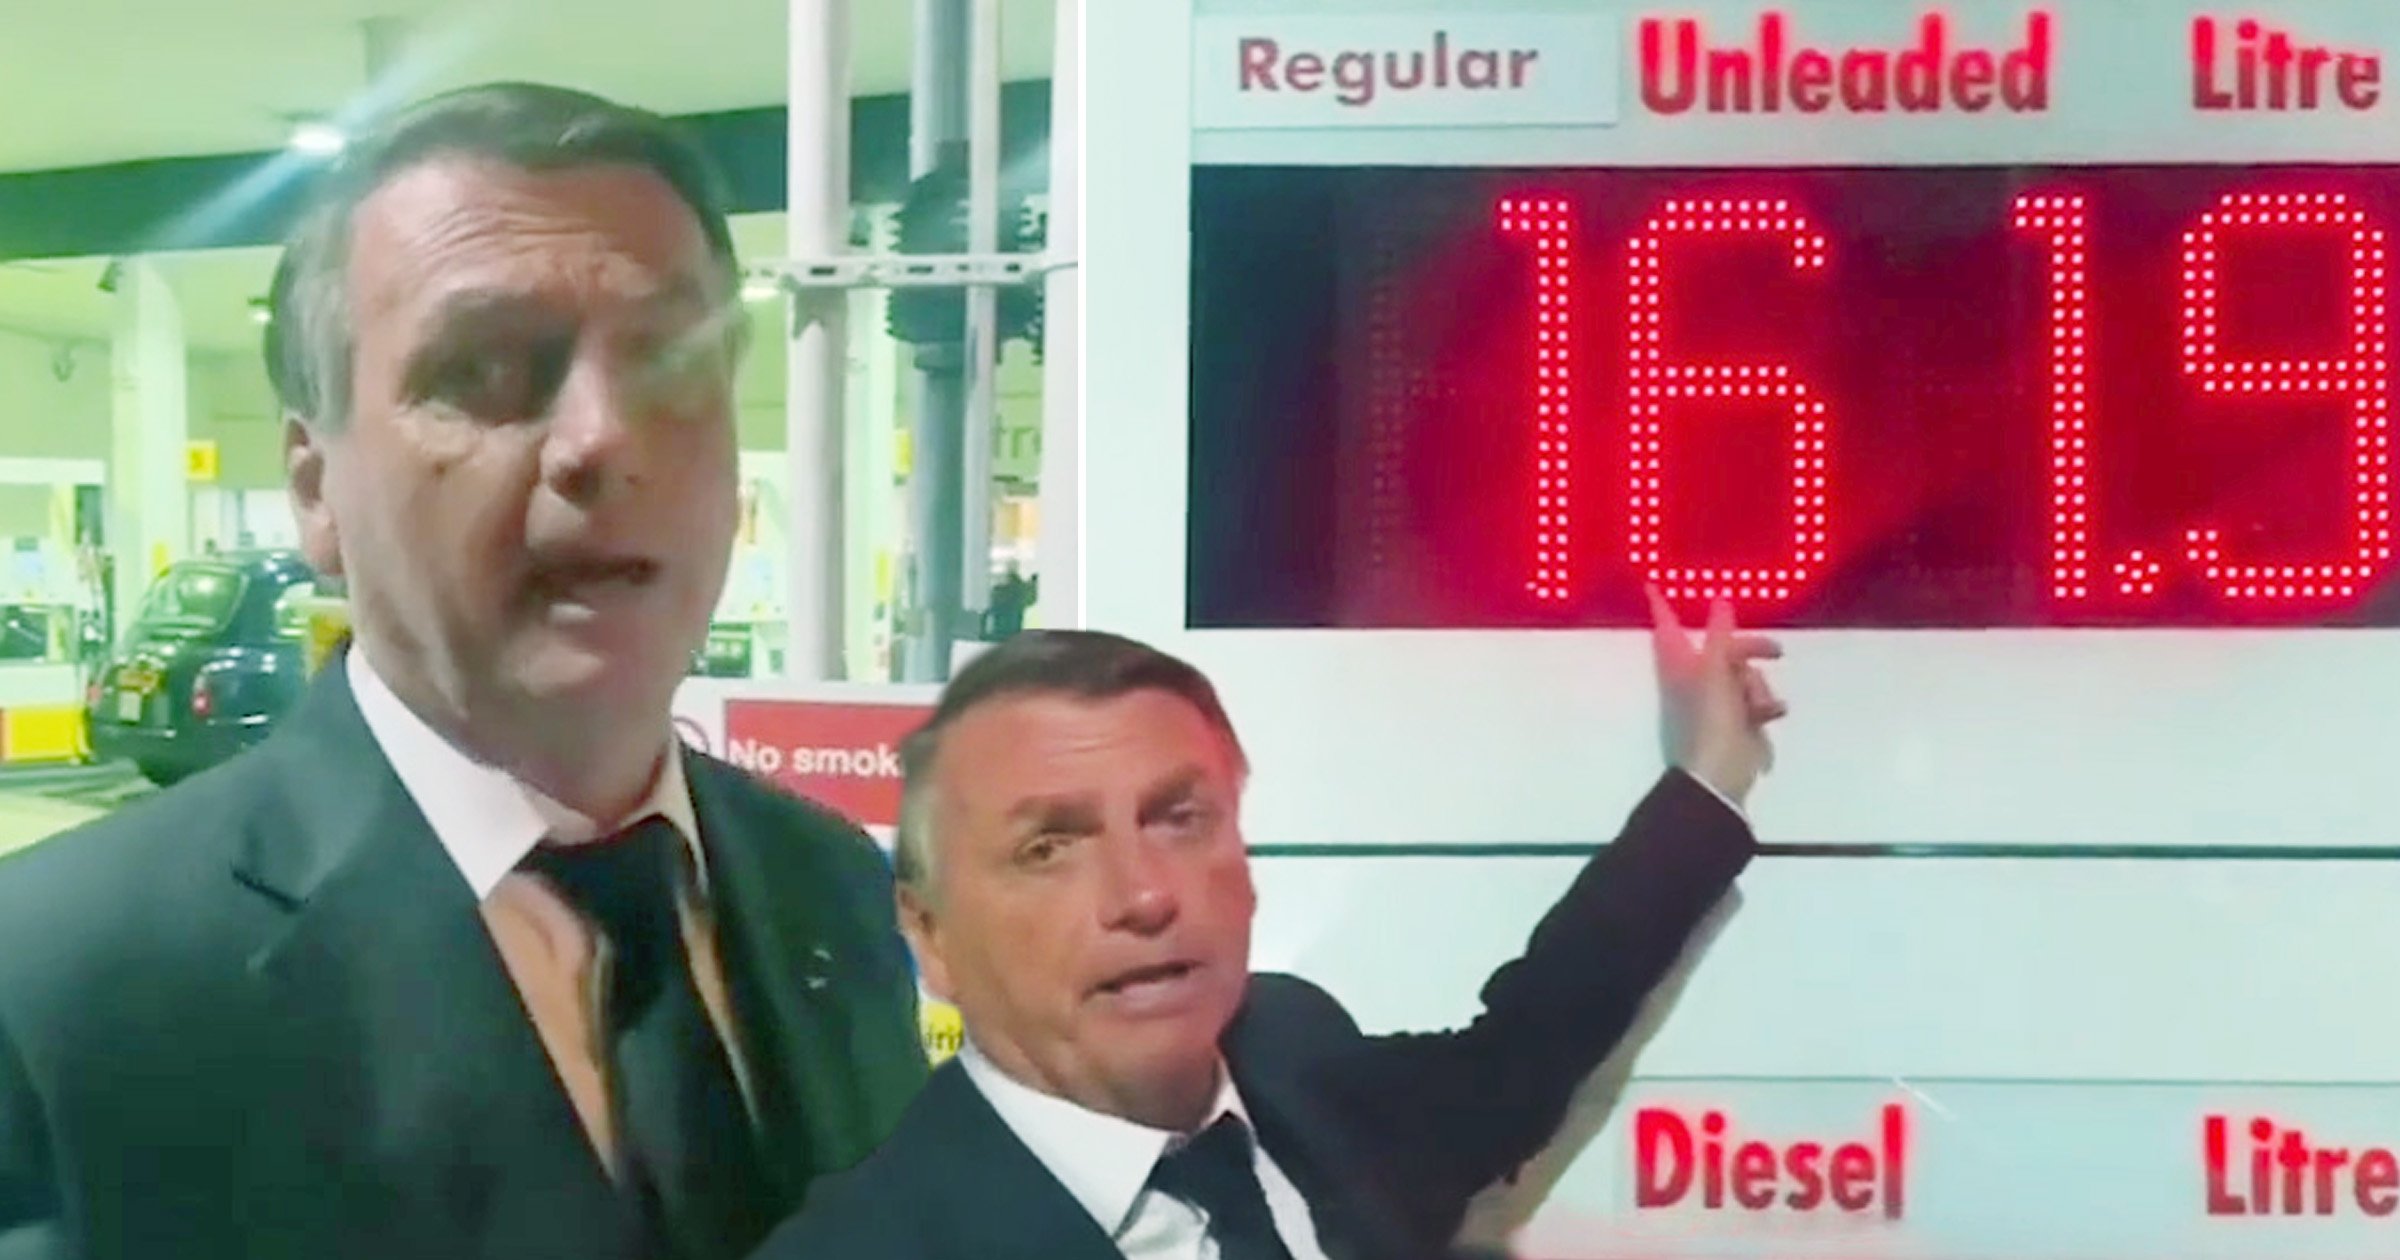 Brazilian president shares outrage over UK fuel prices in bizarre video